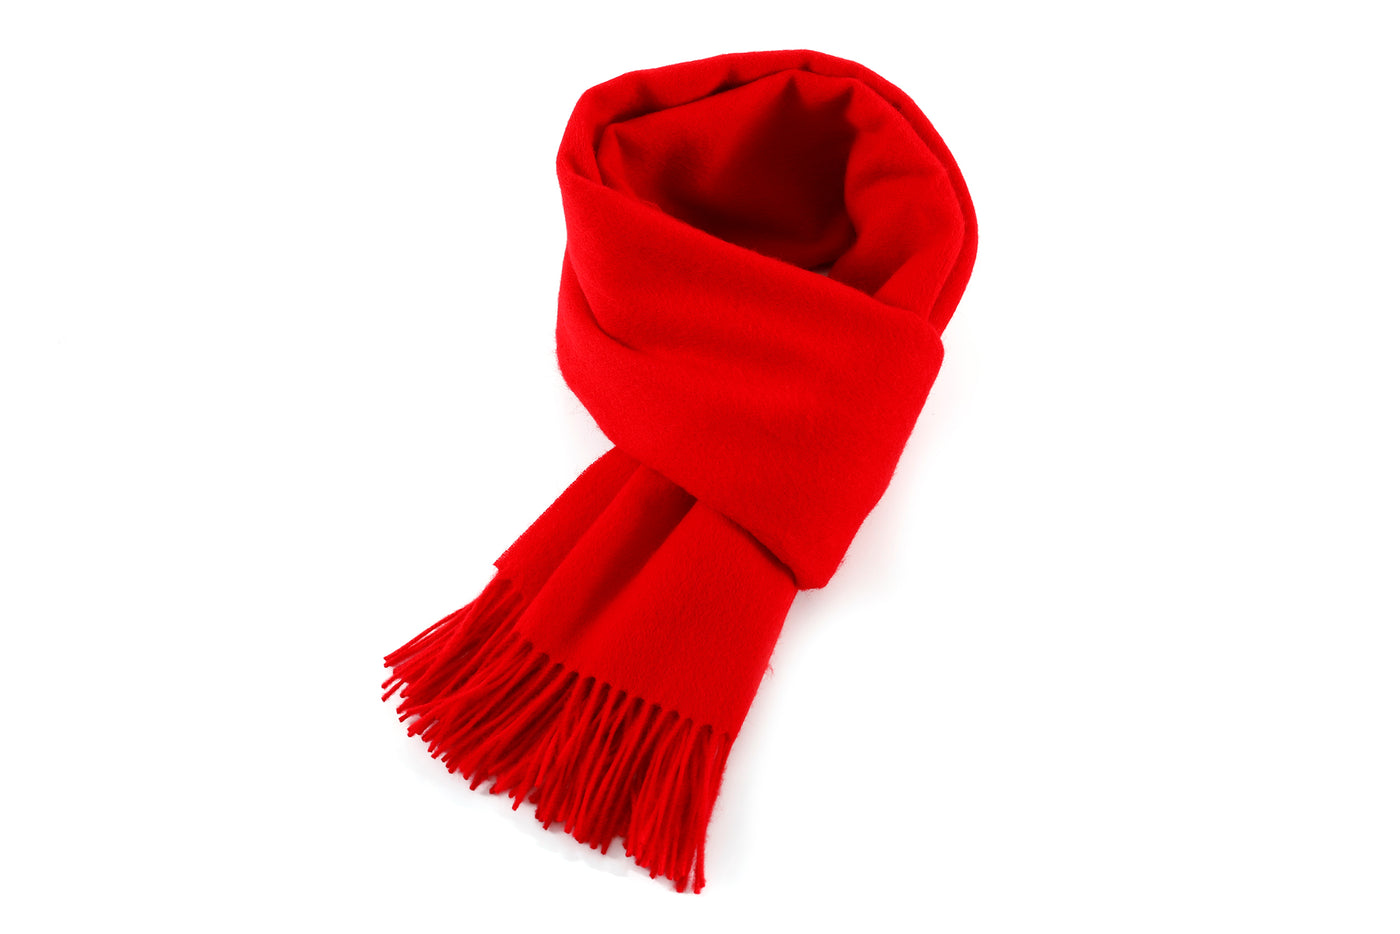 Plain Scarf Red Oversized Wrap 100% Pure Lambswool